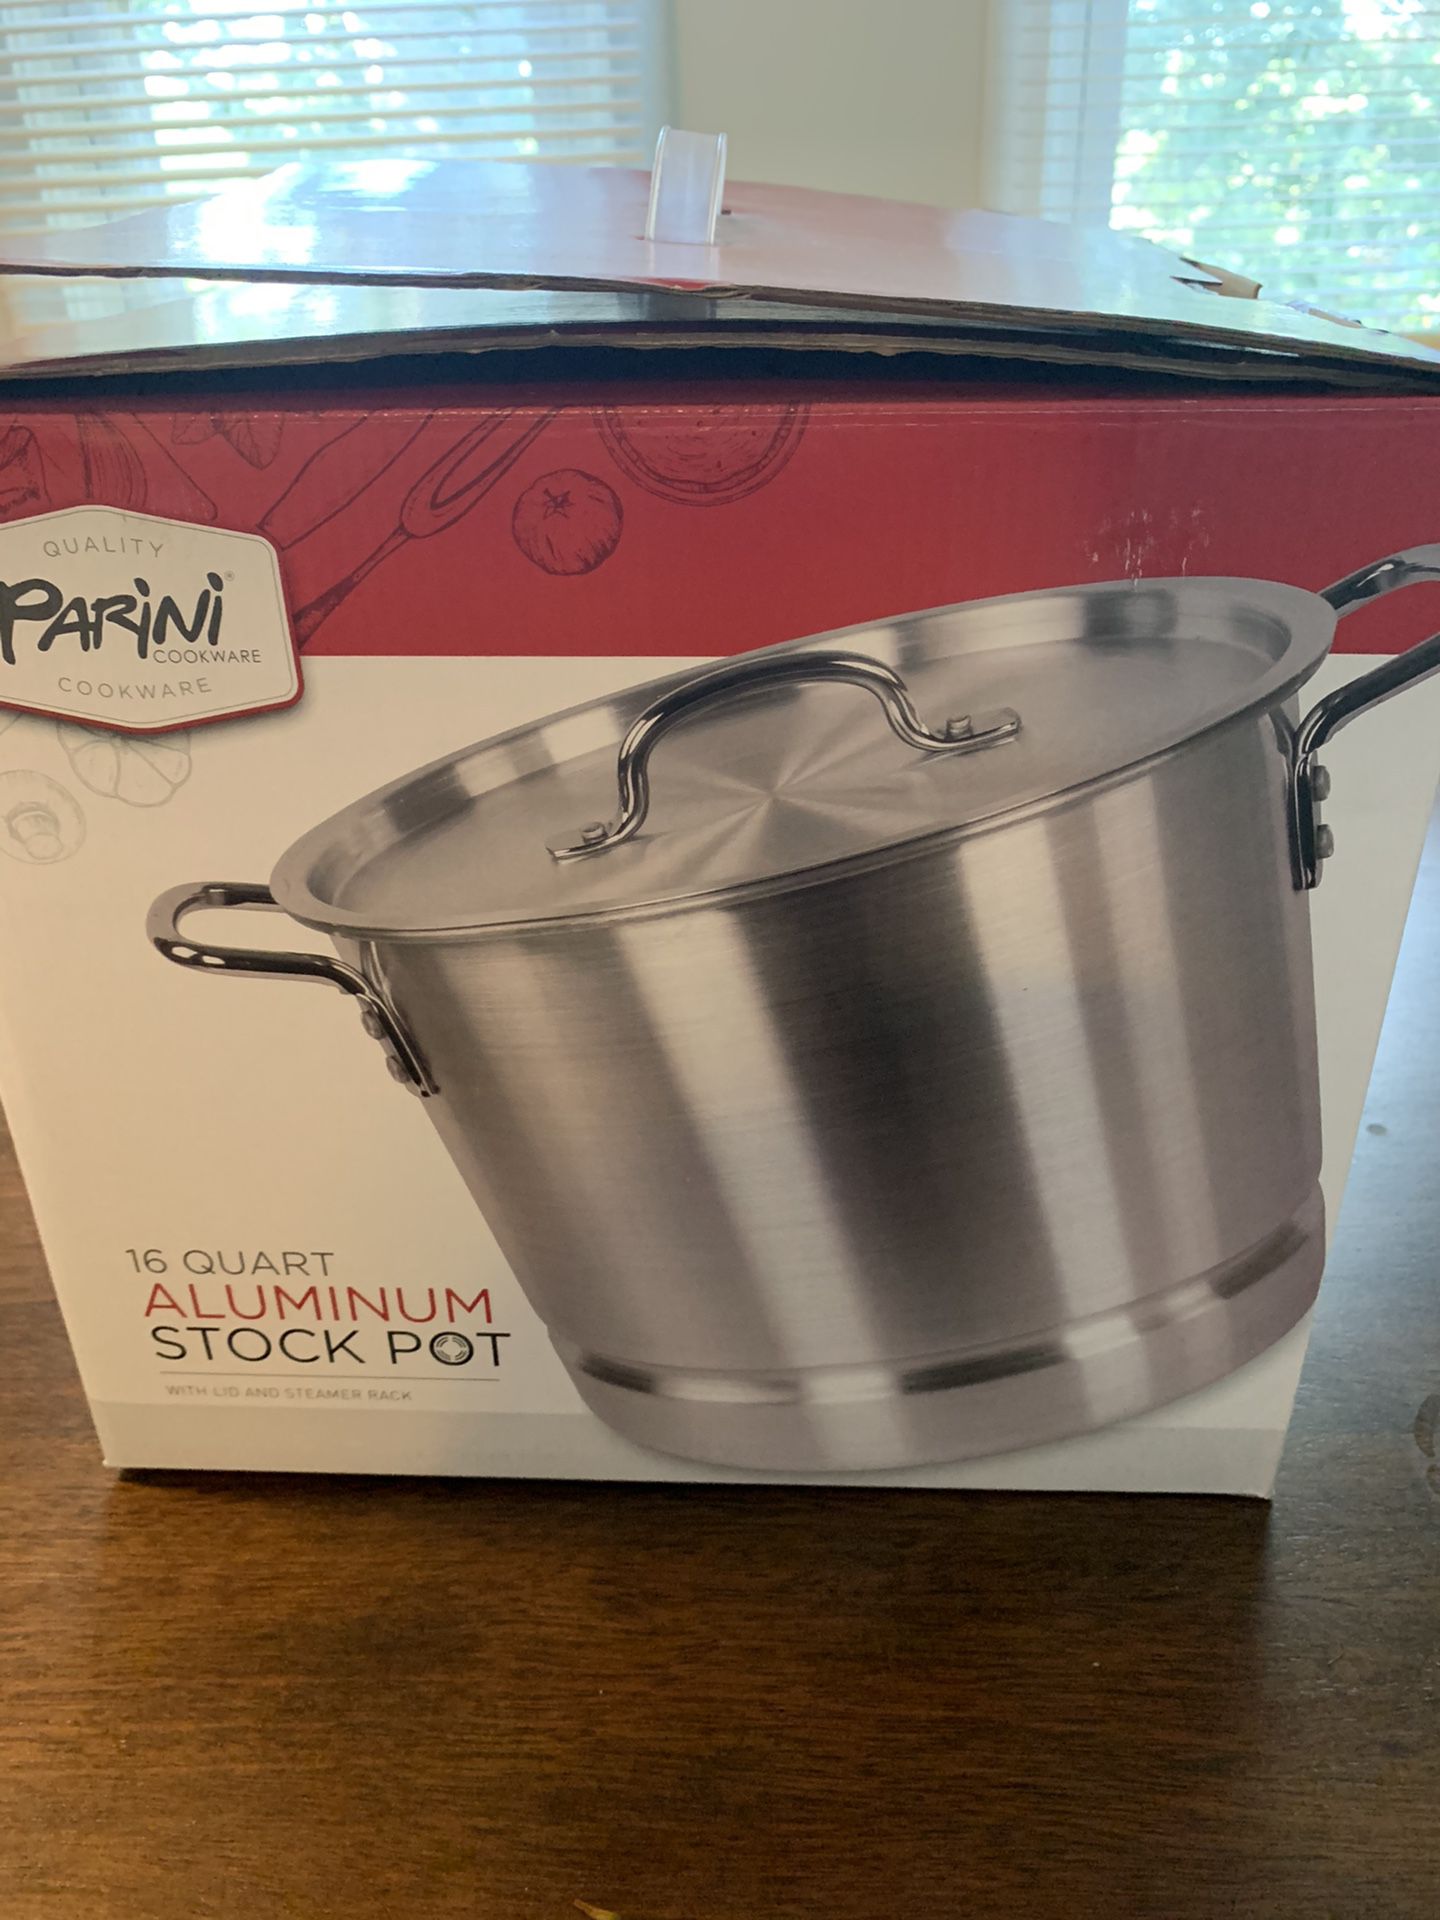 Parini 6 Quart Stainless Steel Stock Pot - Copper Color - Timeless Cookware  Ed.